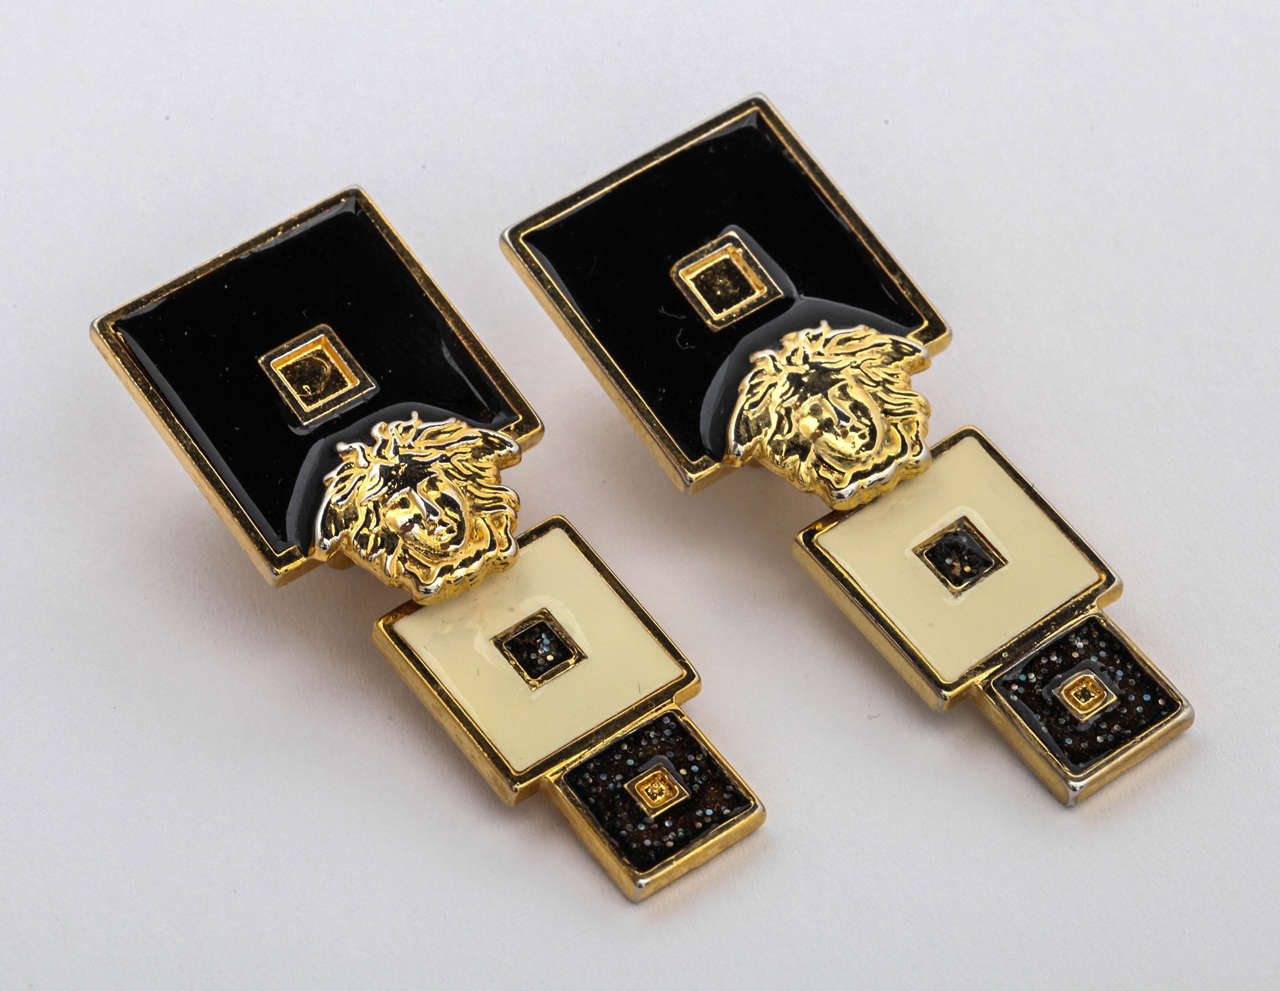 Very rare vintage Gianni Versace earrings with Medusa in black and white.